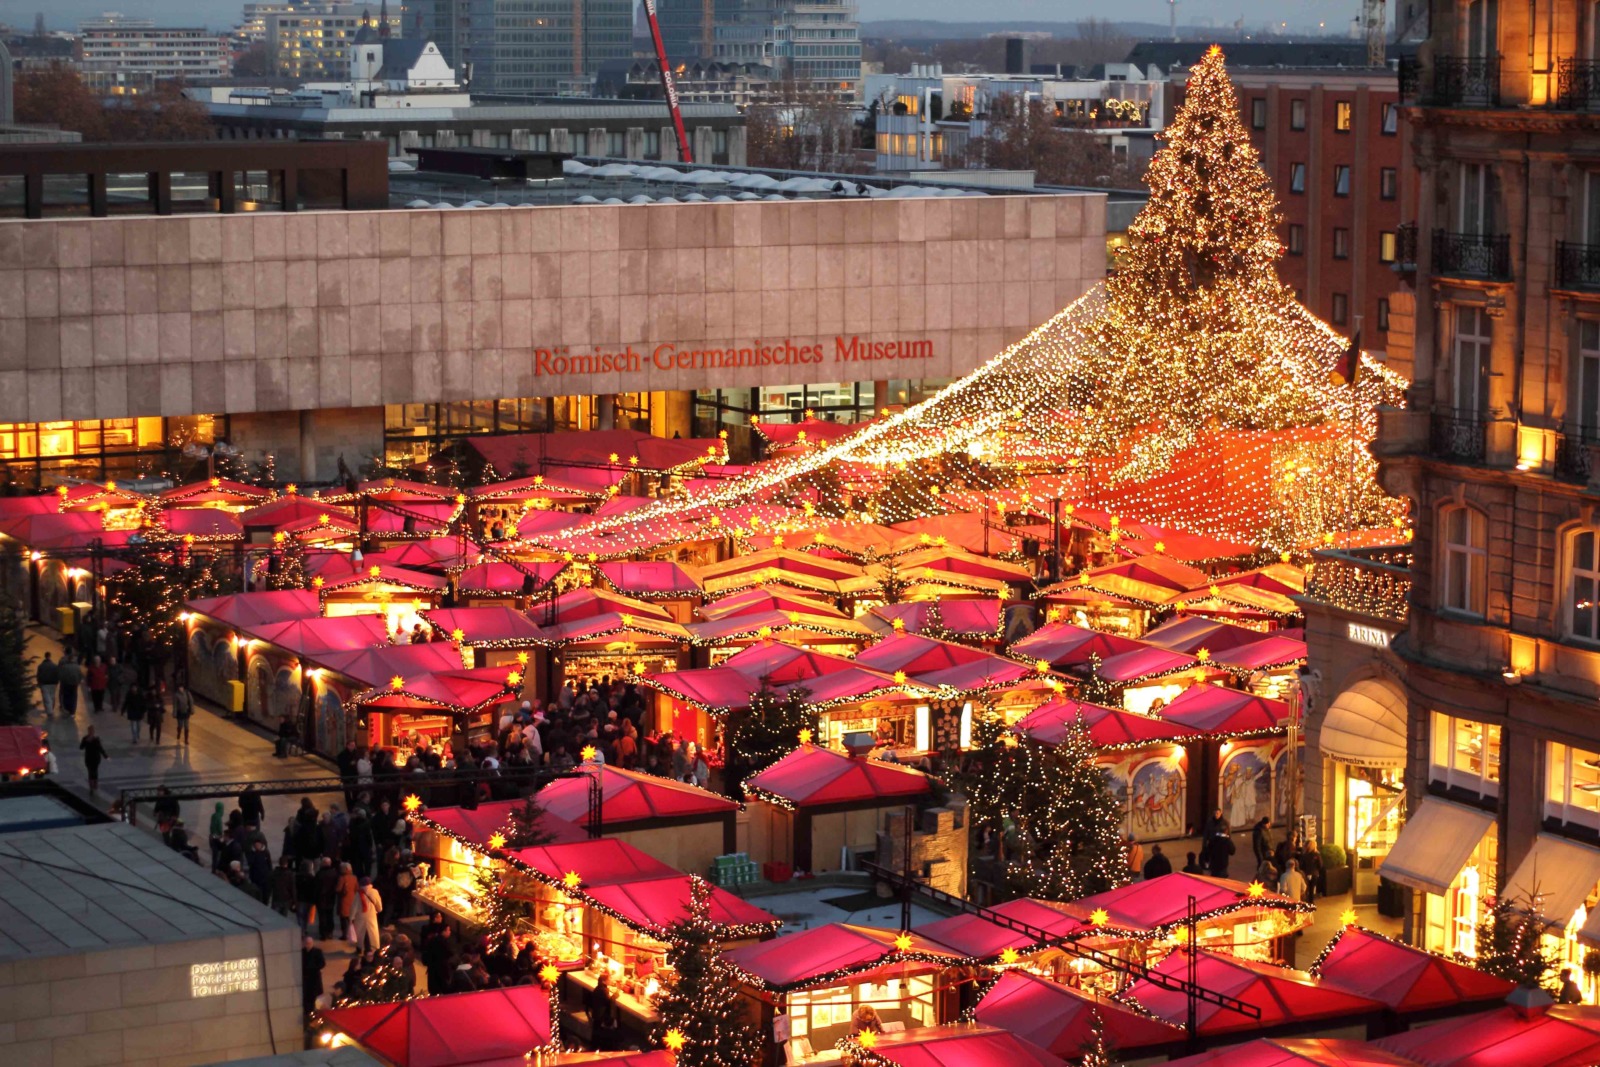 Christmas markets in Germany - Cologne Christmas Market © Superbass - licence [CC BY-SA 3.0] from Wikimedia Commons